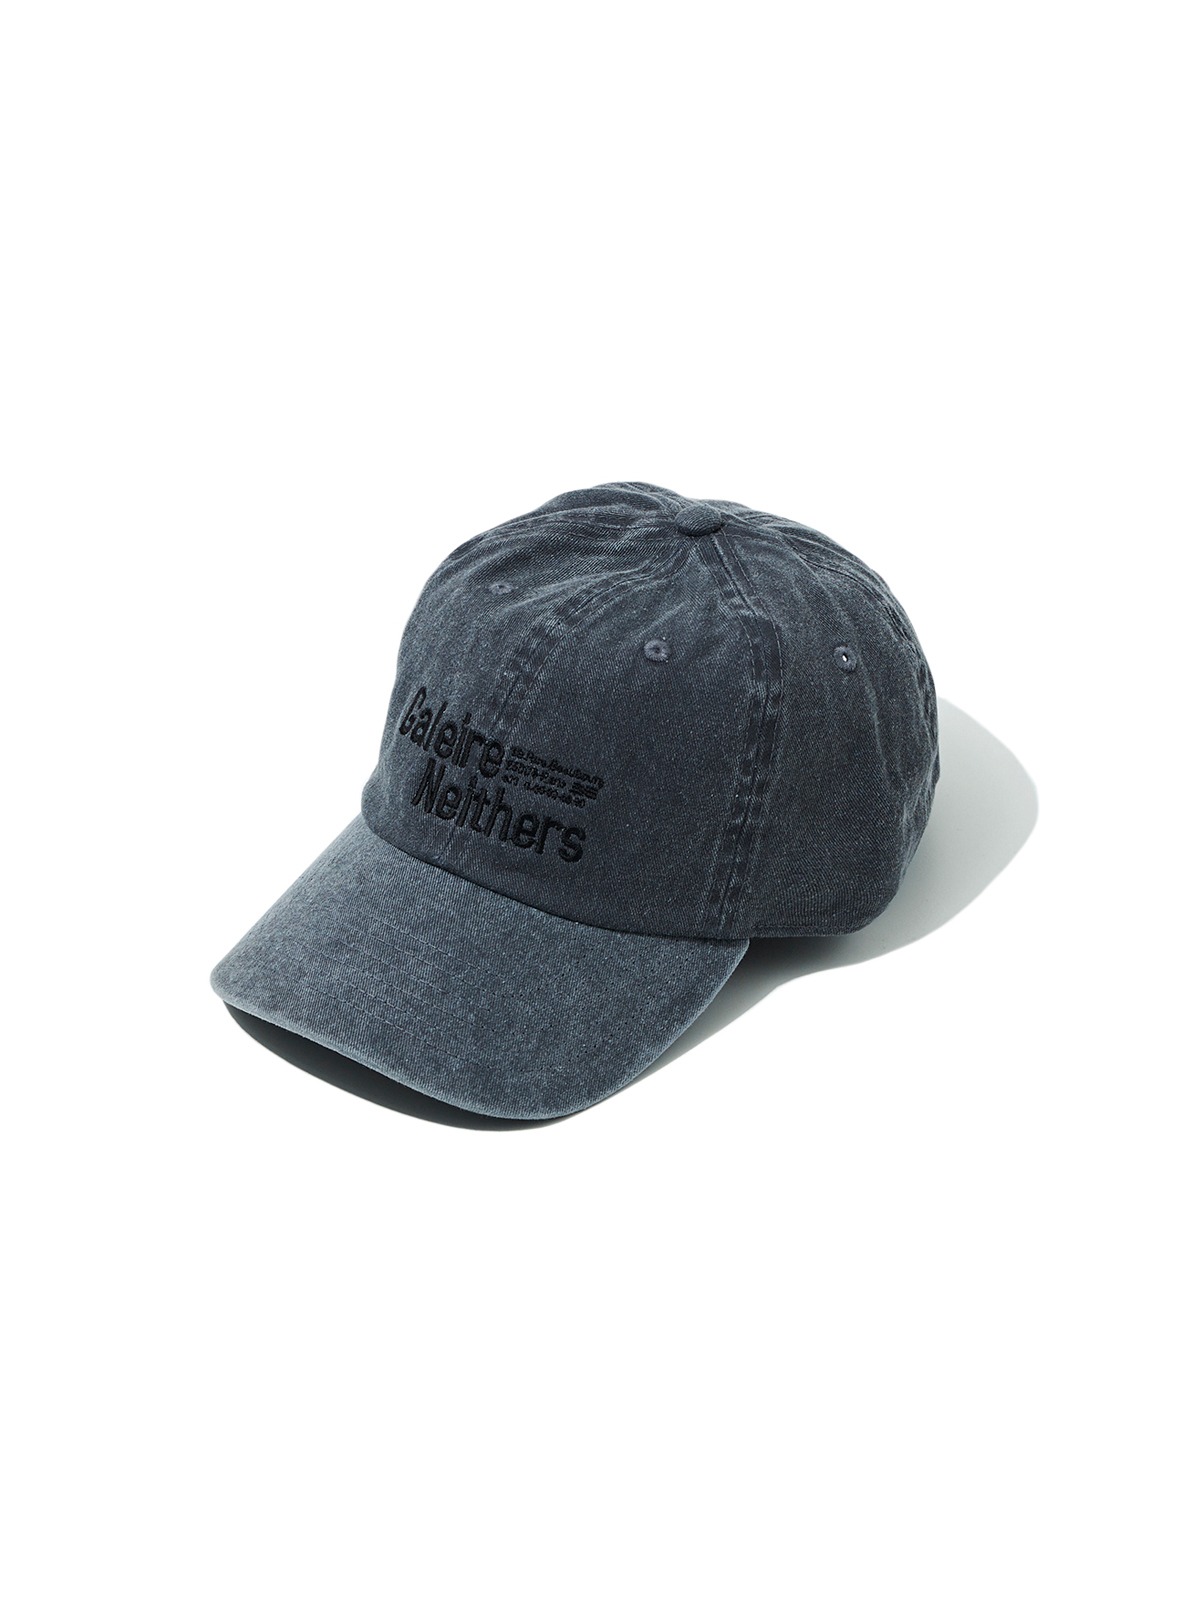 Galeire Cap (Charcoal)